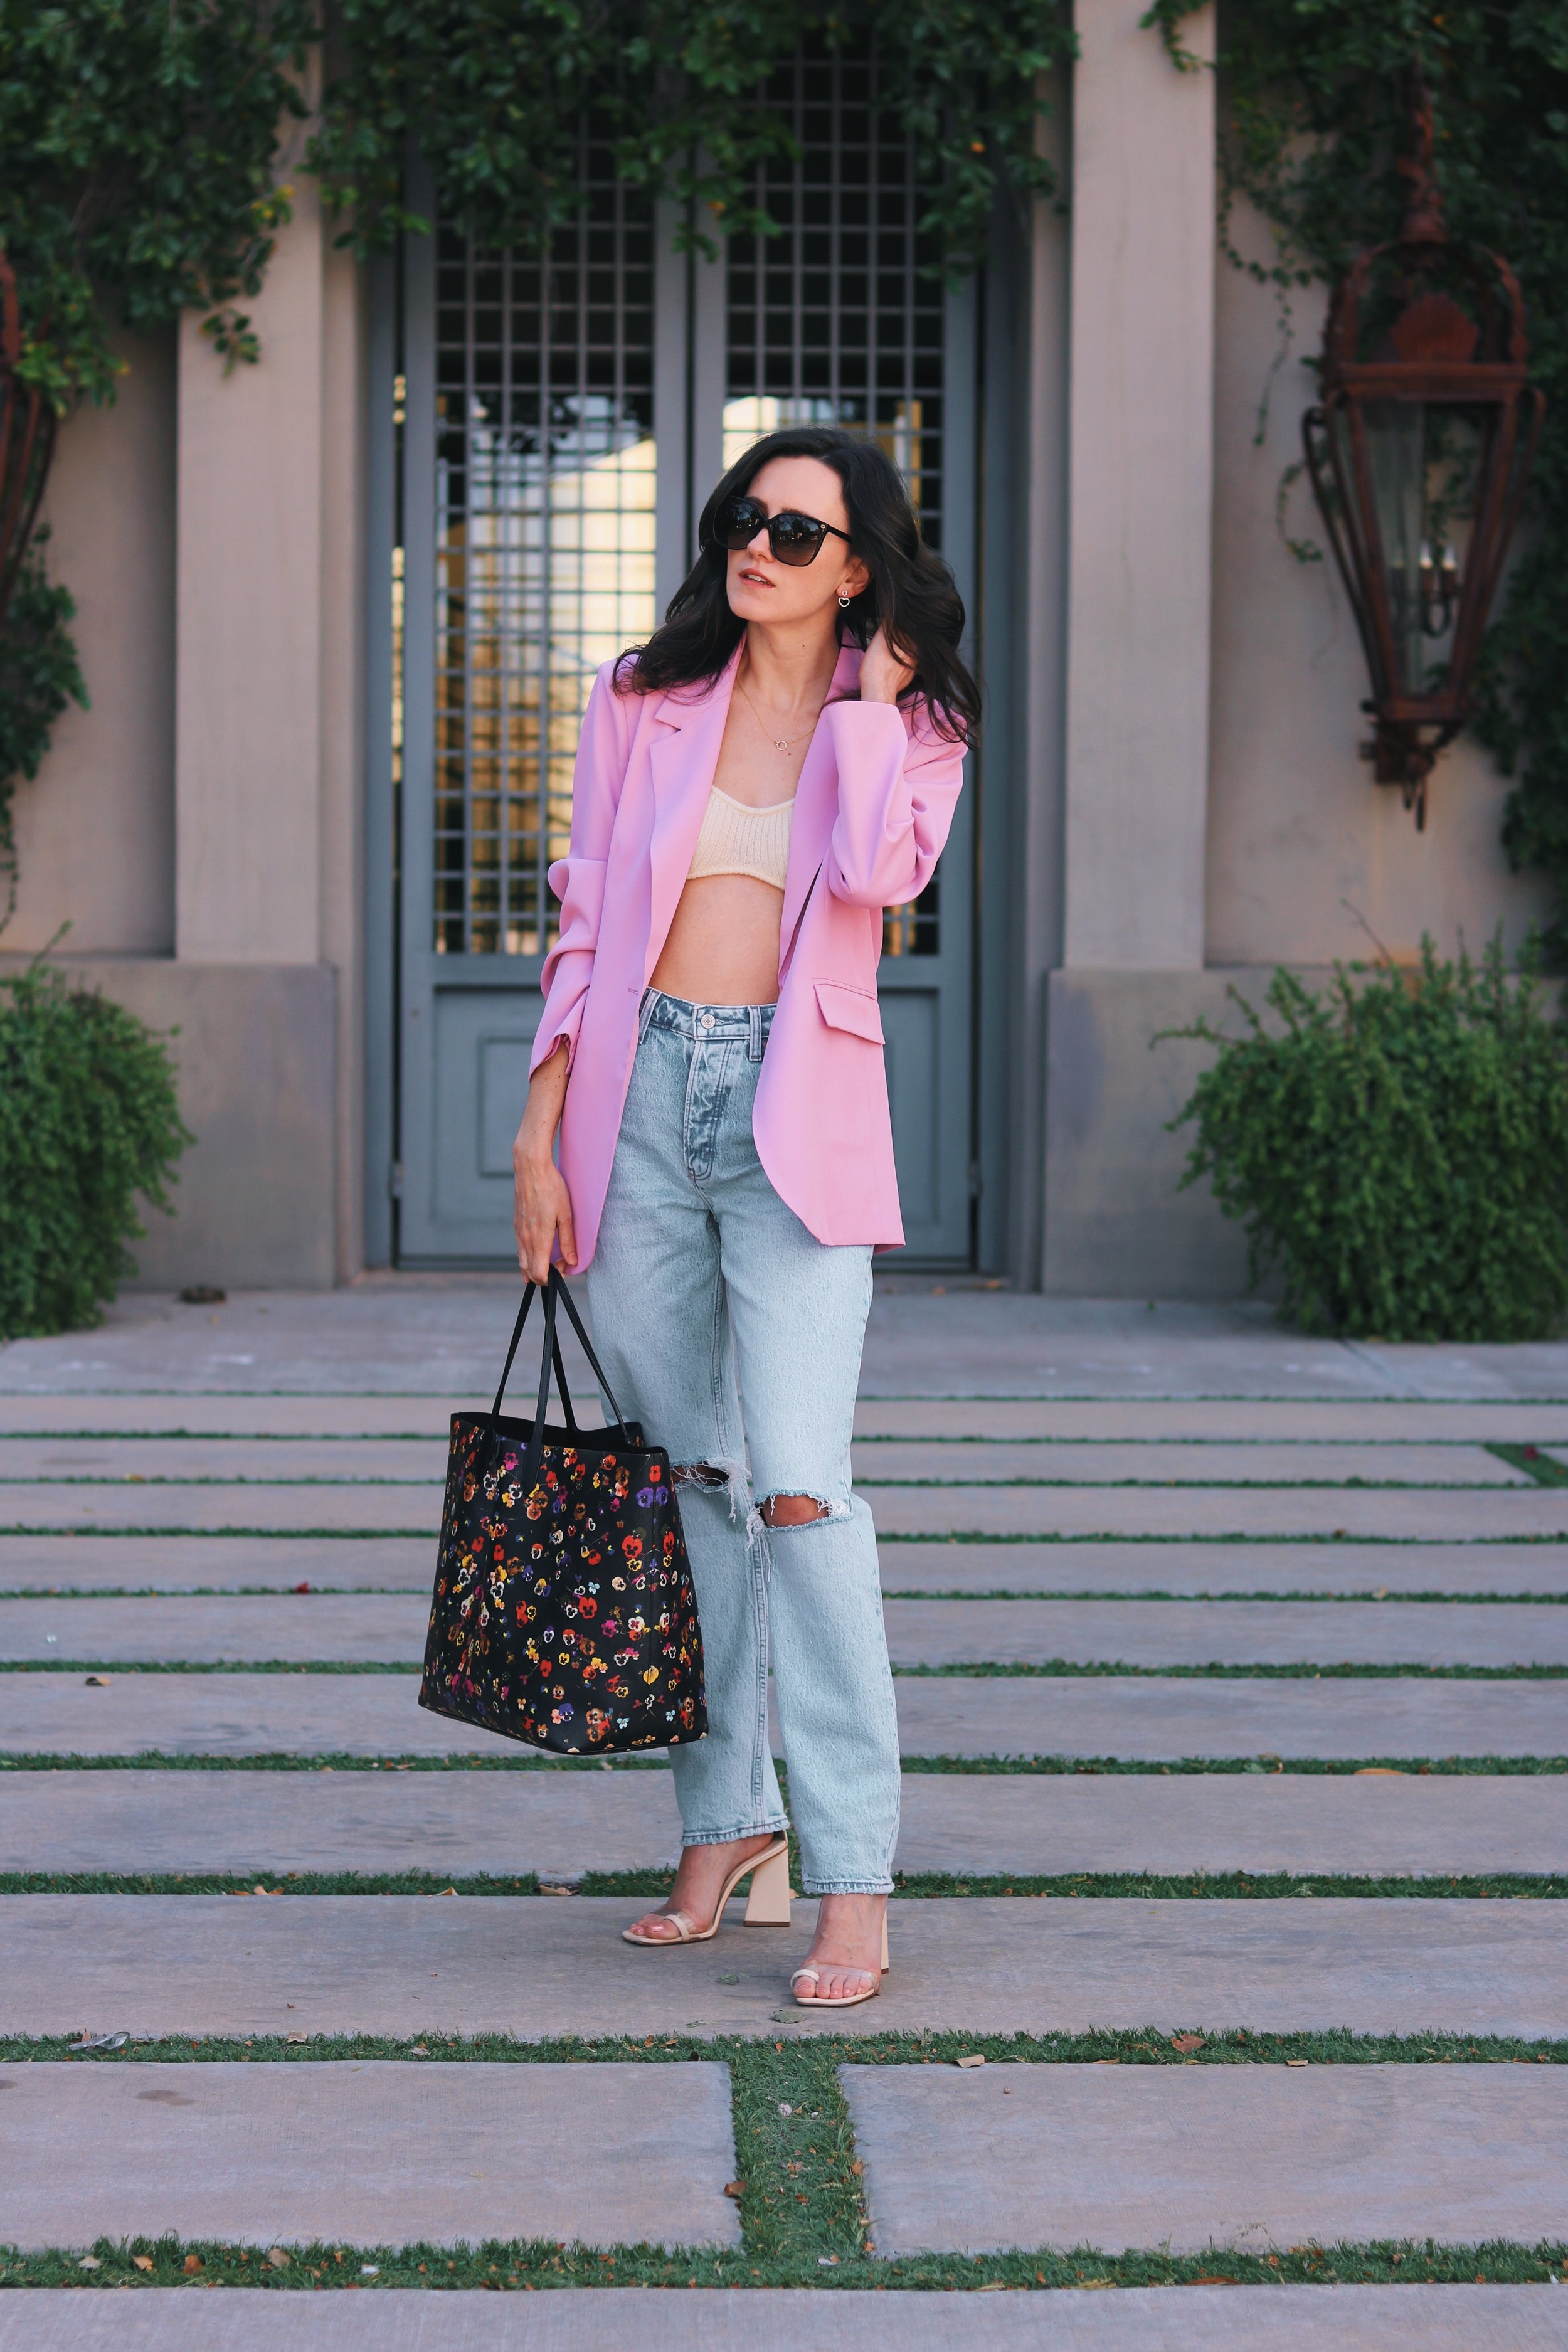 How To Pull Off The Oversized Blazer Trend